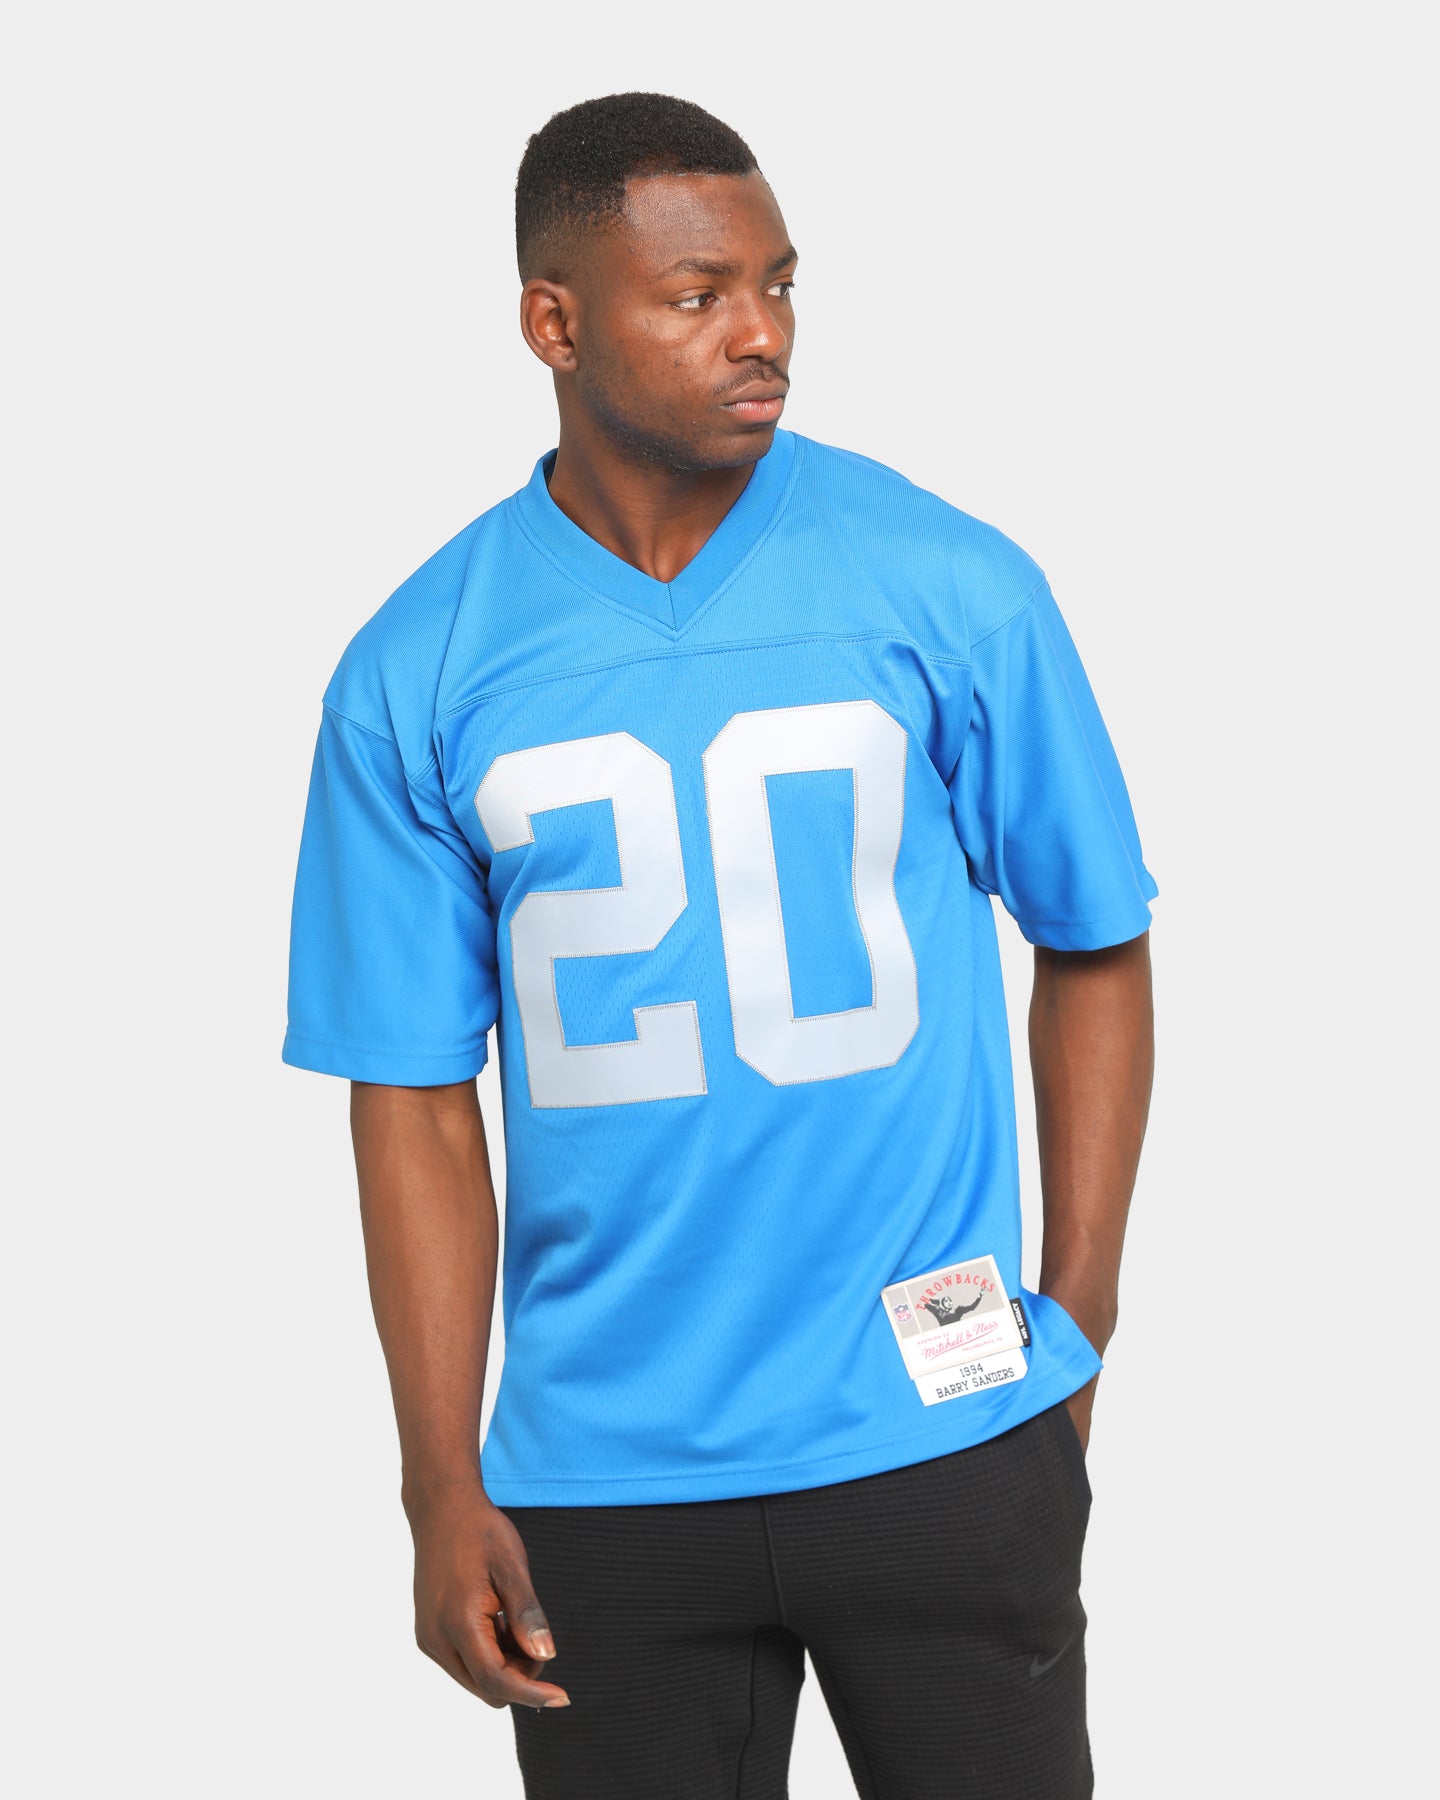 barry sanders mitchell and ness jersey